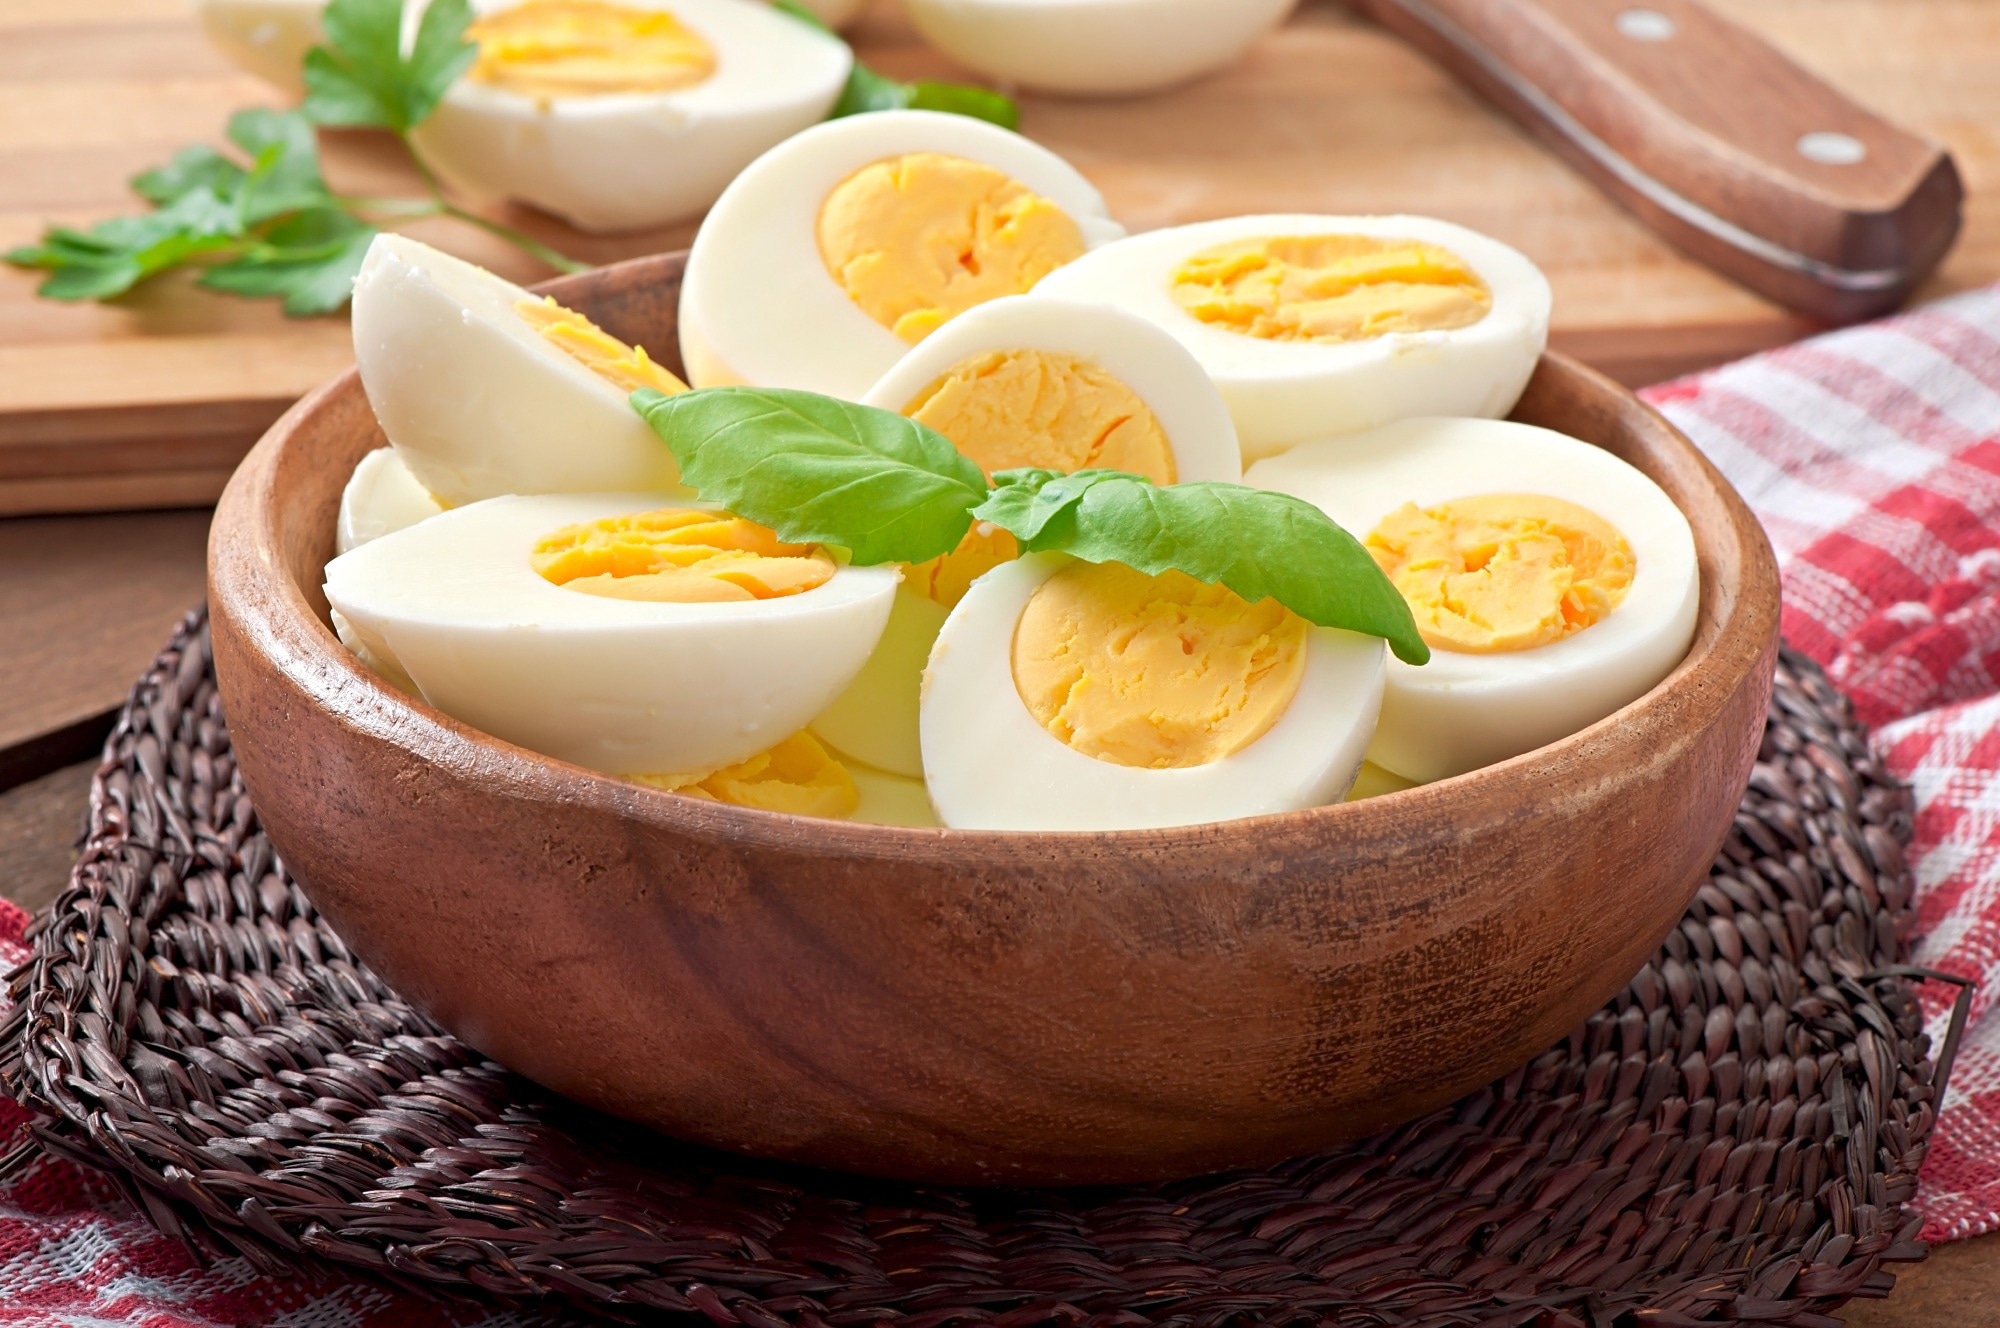 Consumption of Different Egg-Based Diets Alters Clinical Metabolic and Hematological Parameters in Young, Healthy Men and Women